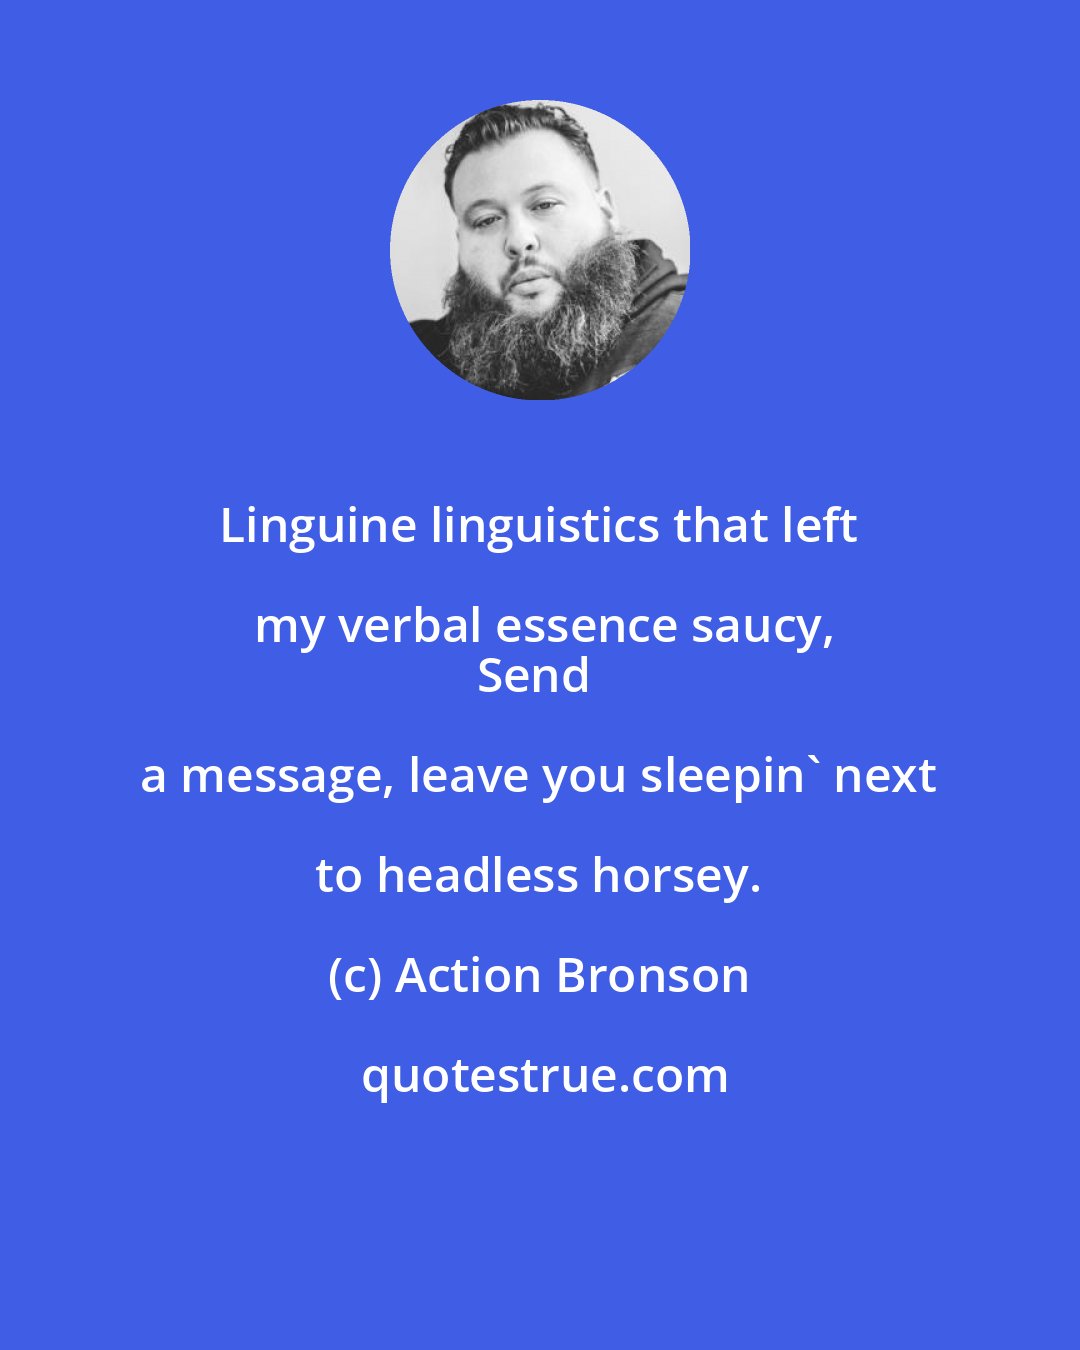 Action Bronson: Linguine linguistics that left my verbal essence saucy,
Send a message, leave you sleepin' next to headless horsey.